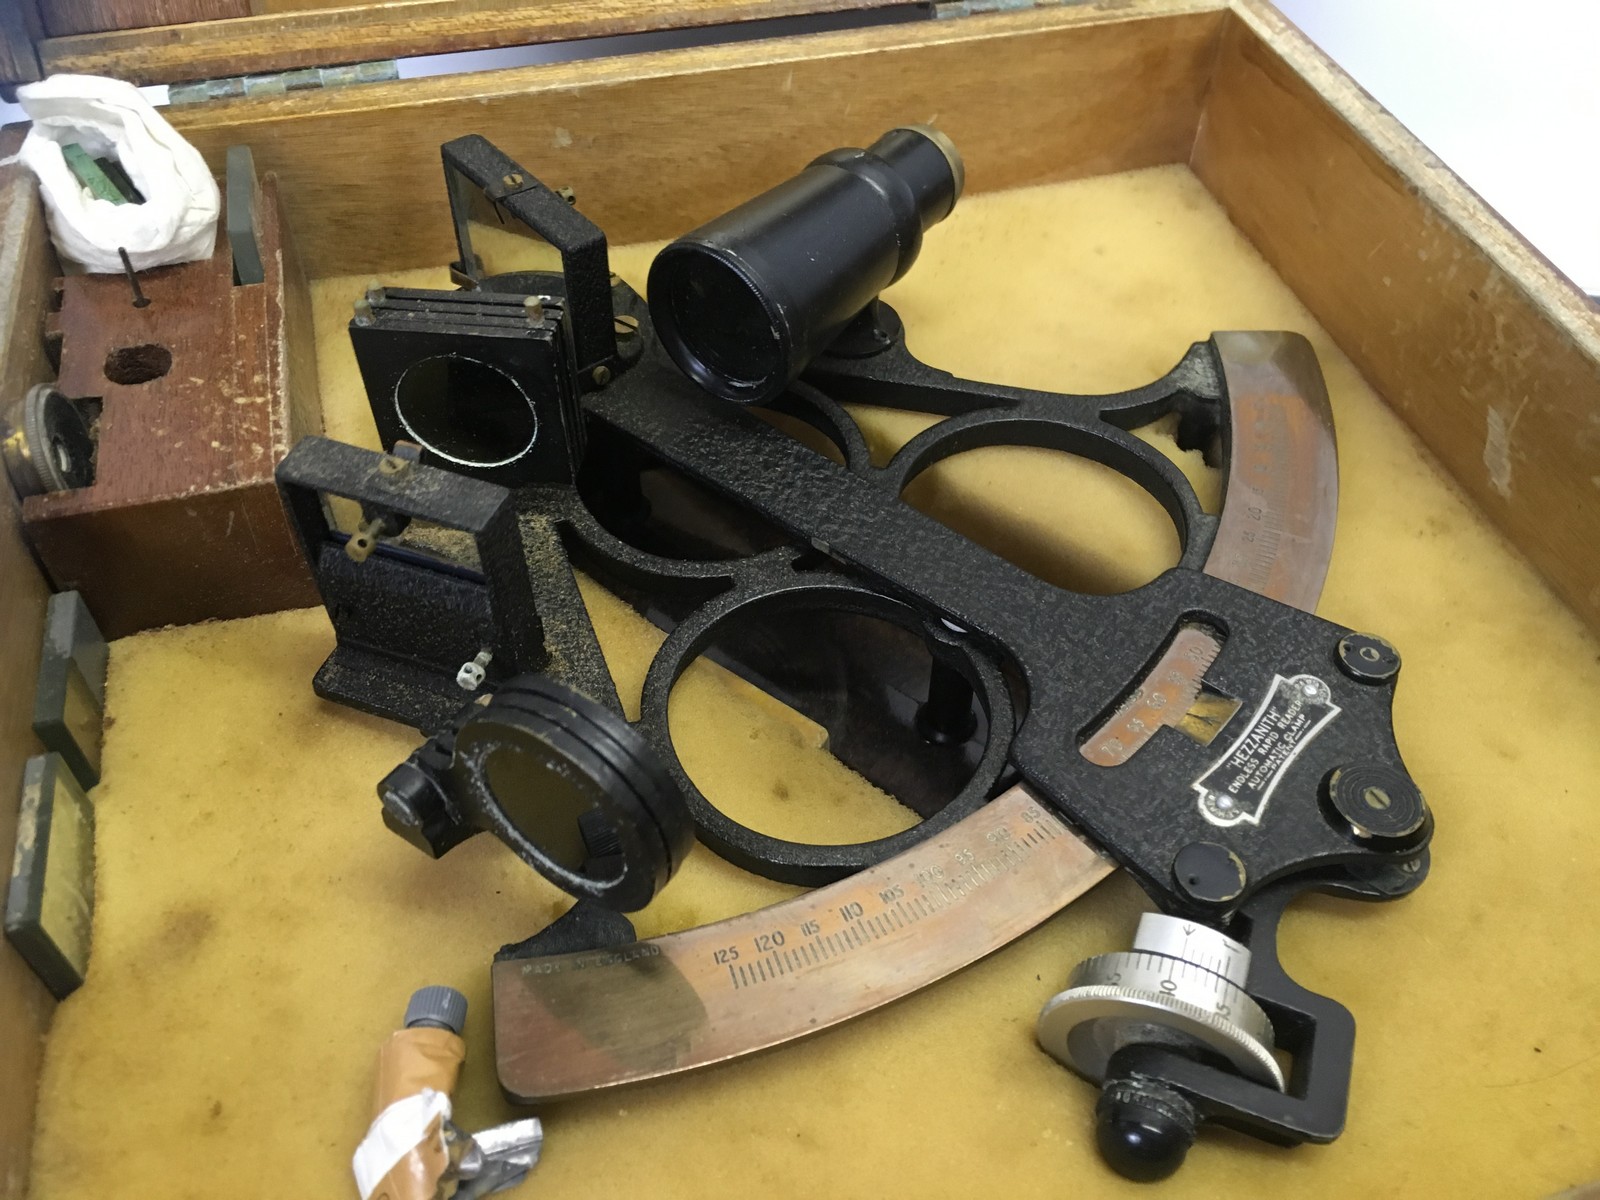 1930'S CASED SEXTANT BY "HESSANITH" LONDON - Image 2 of 6